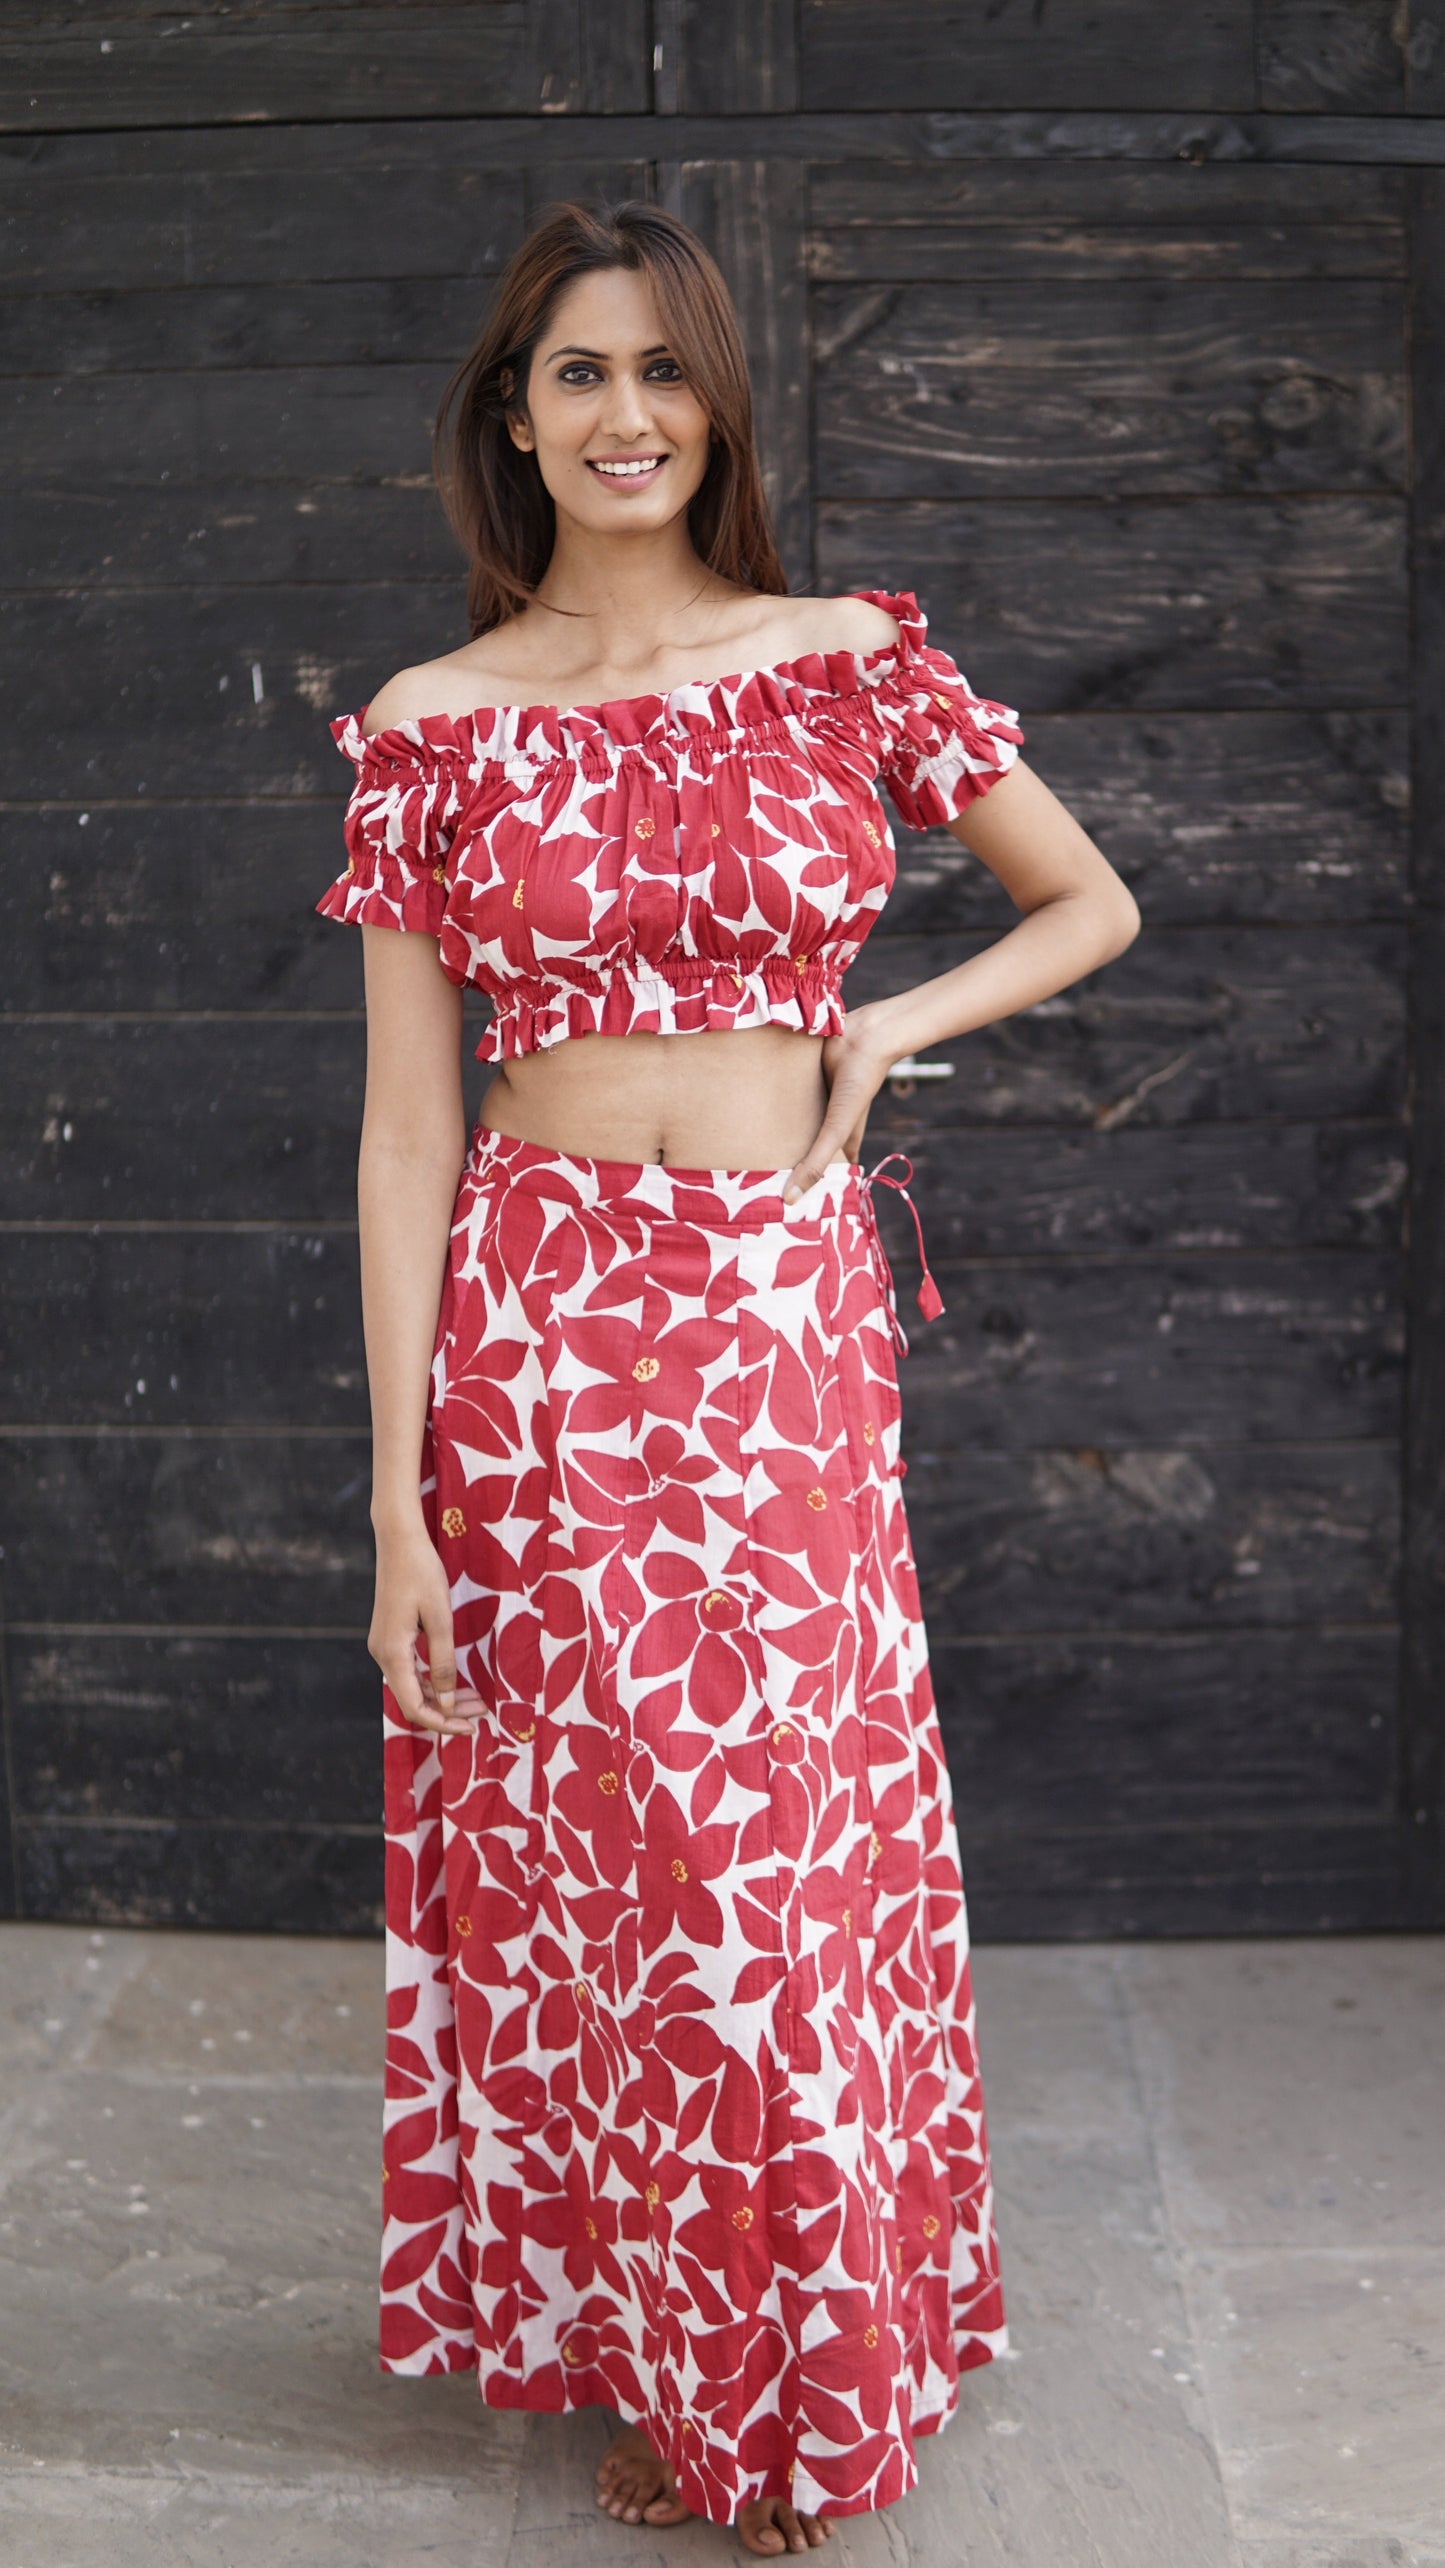 coord set. red and cream skirt and ruched top co-ord set for women. maxi skirt and matching top. summer maxi skirt in red and cream. Boho co-ord set. cotton co-ord set for summer. 